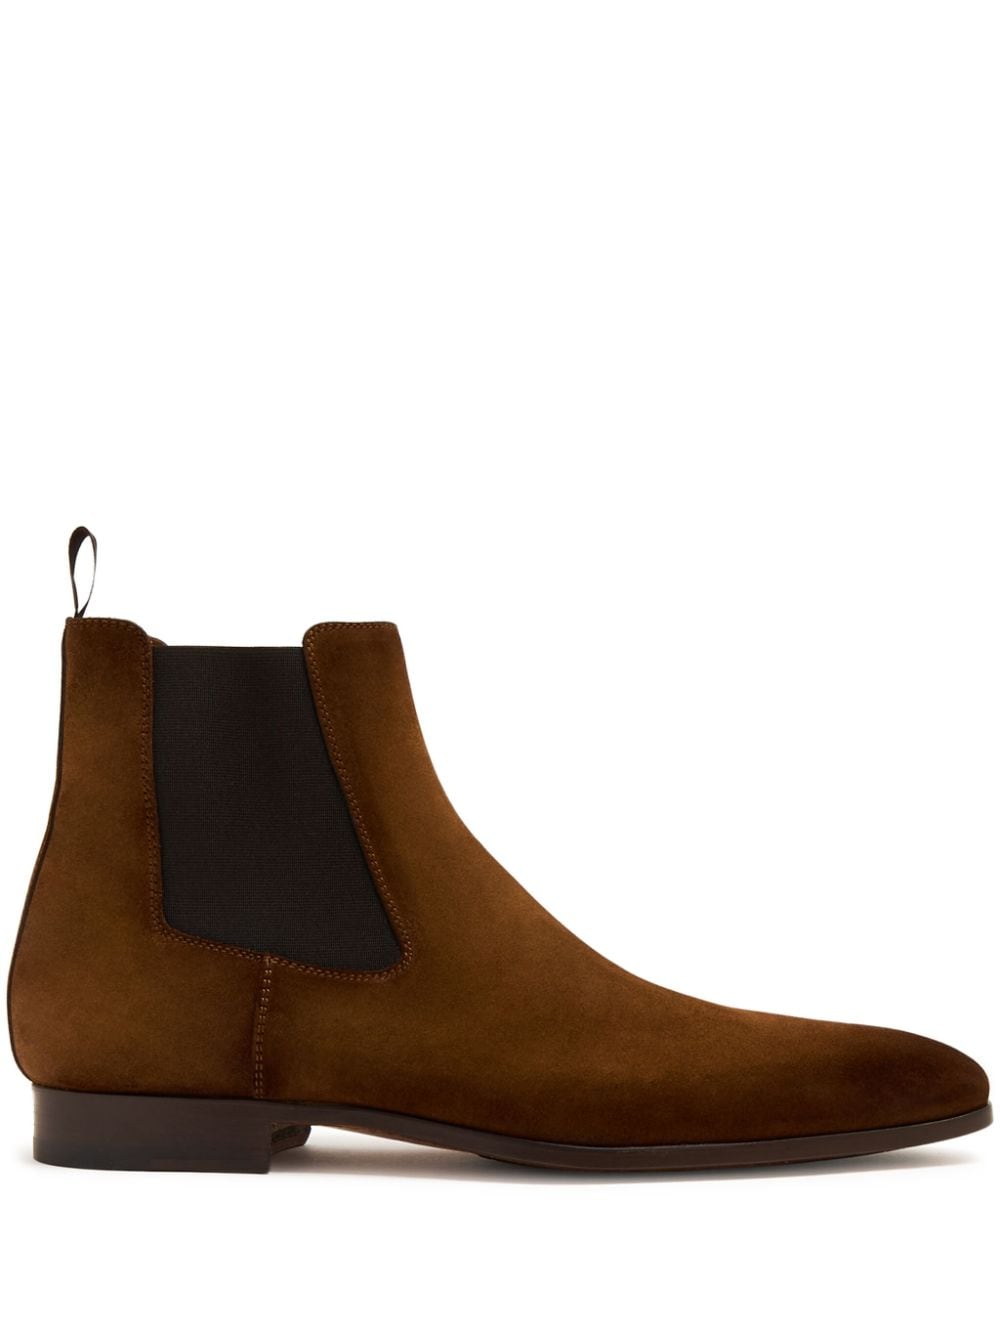 almond-toe suede boots